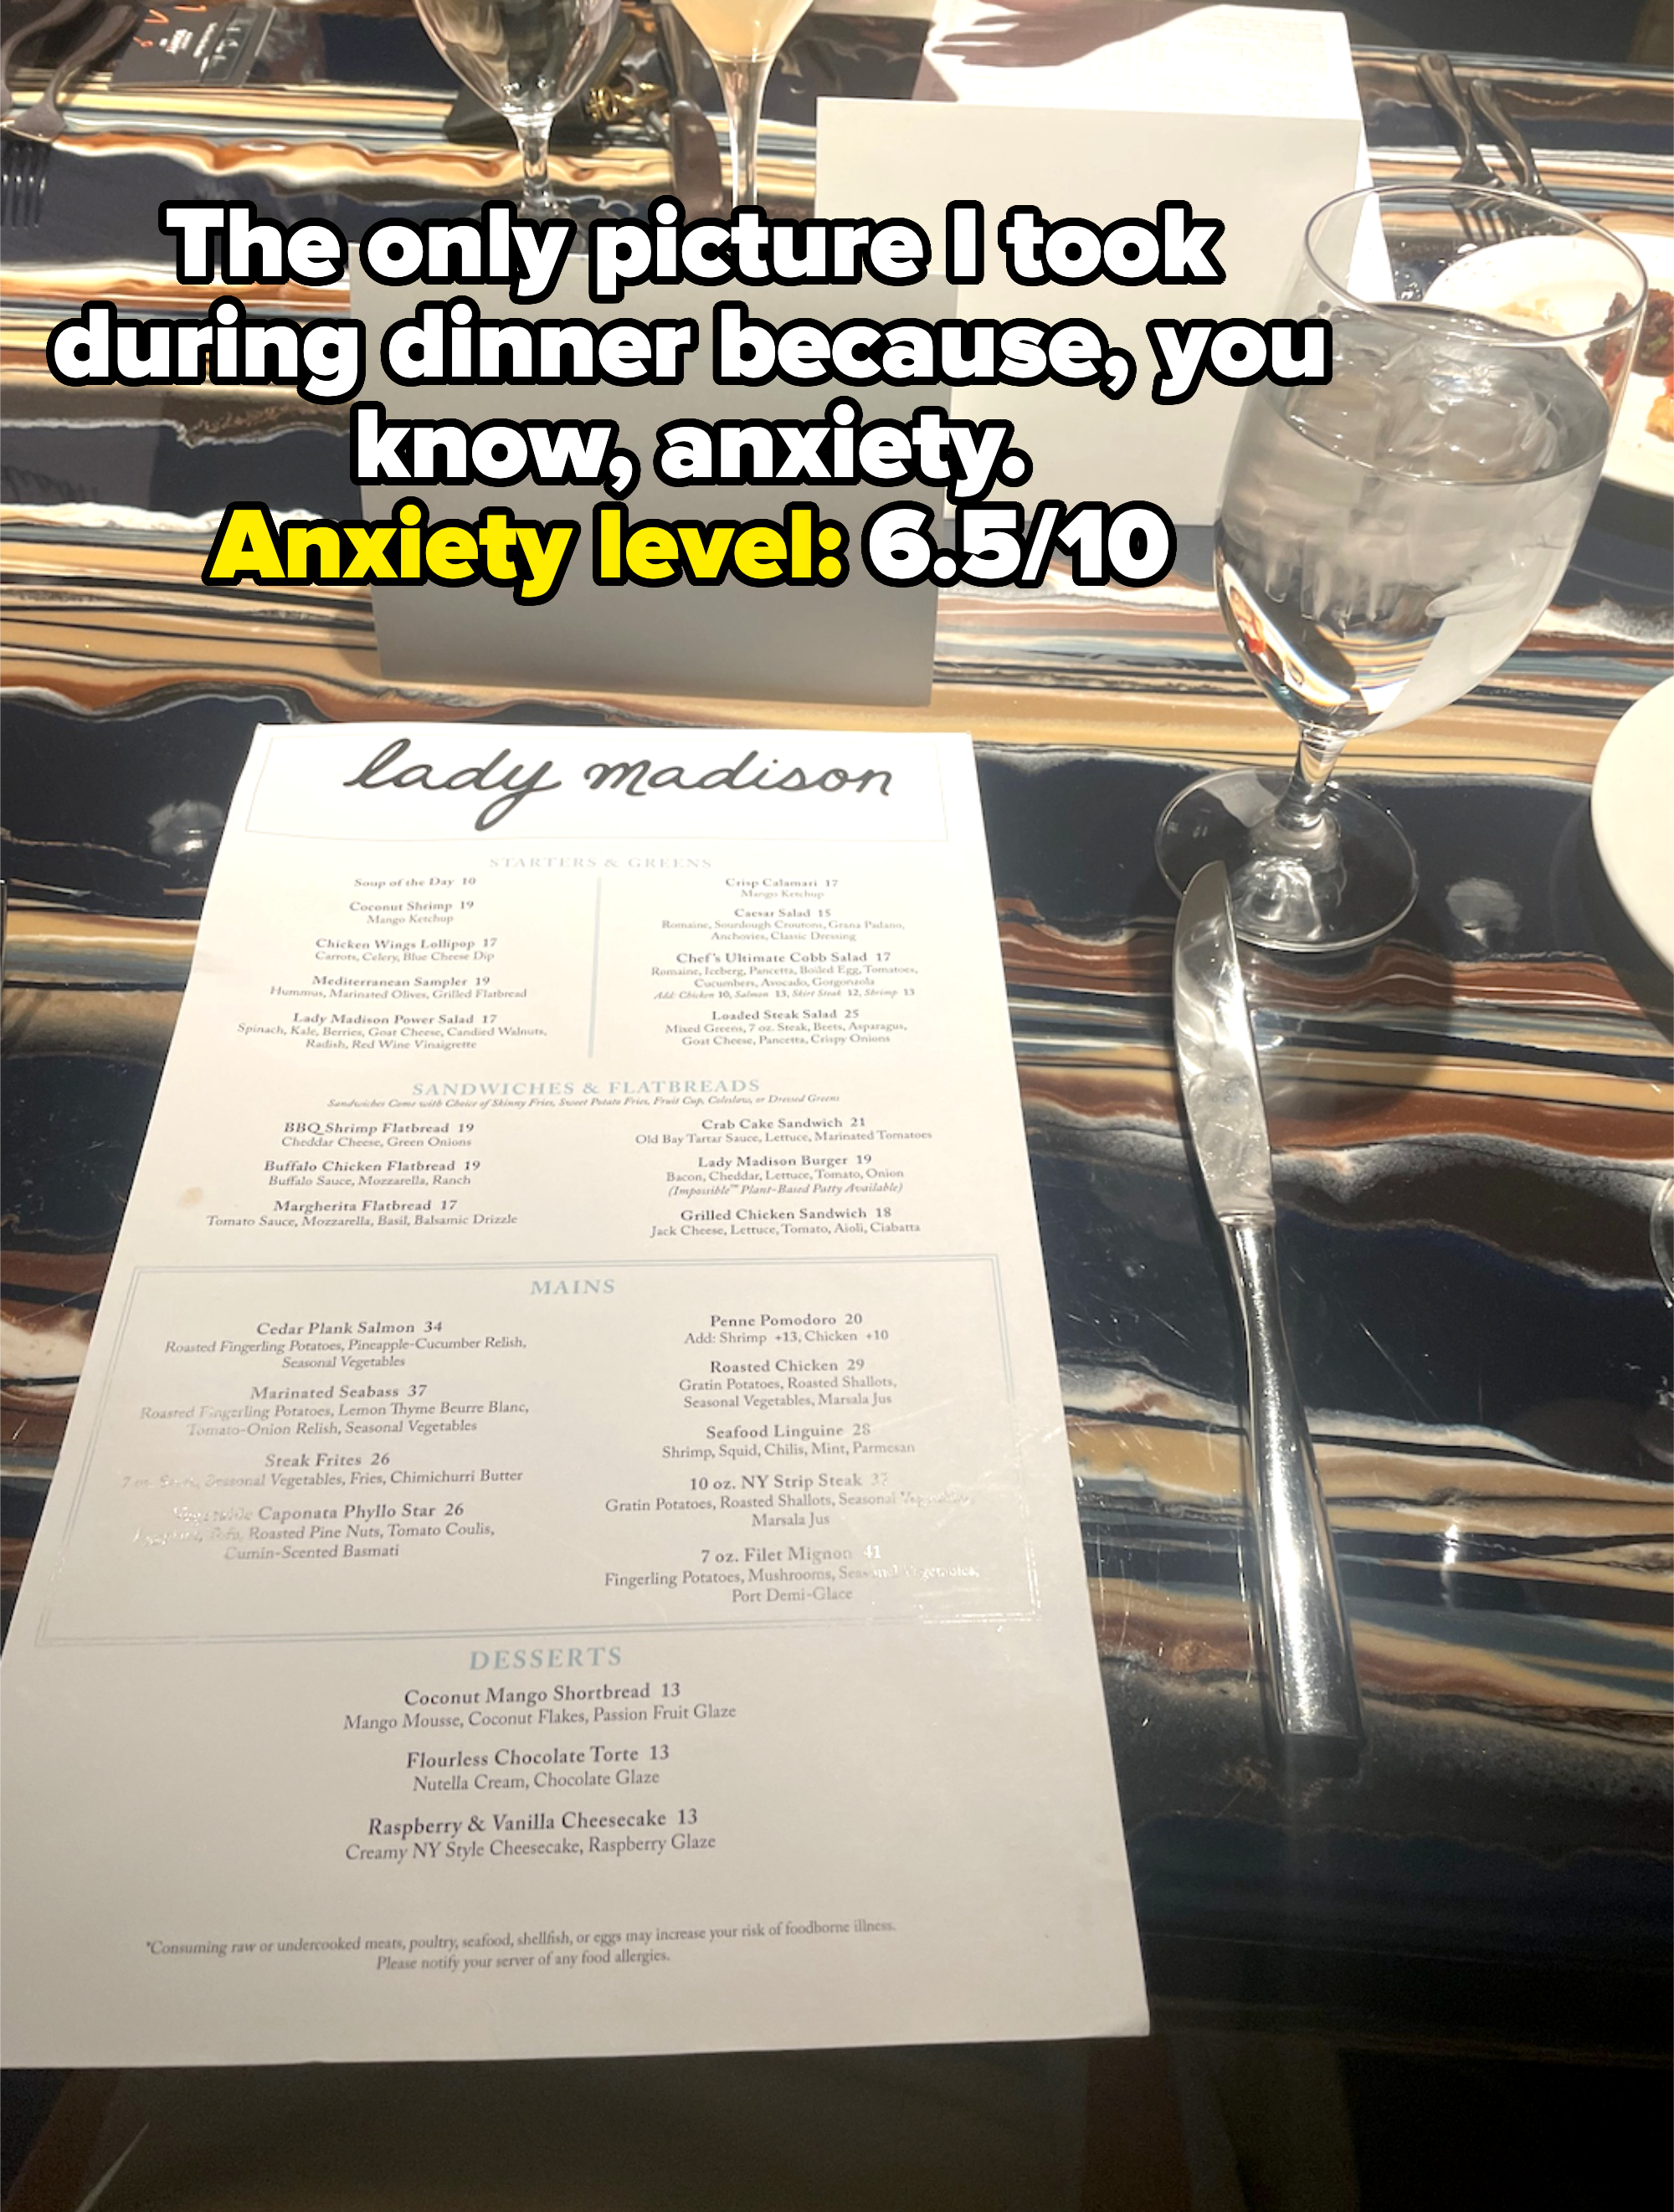 A dinner menu from a restaurant named Lady Madison is shown on a table set with a water glass, fork, knife, and a name card